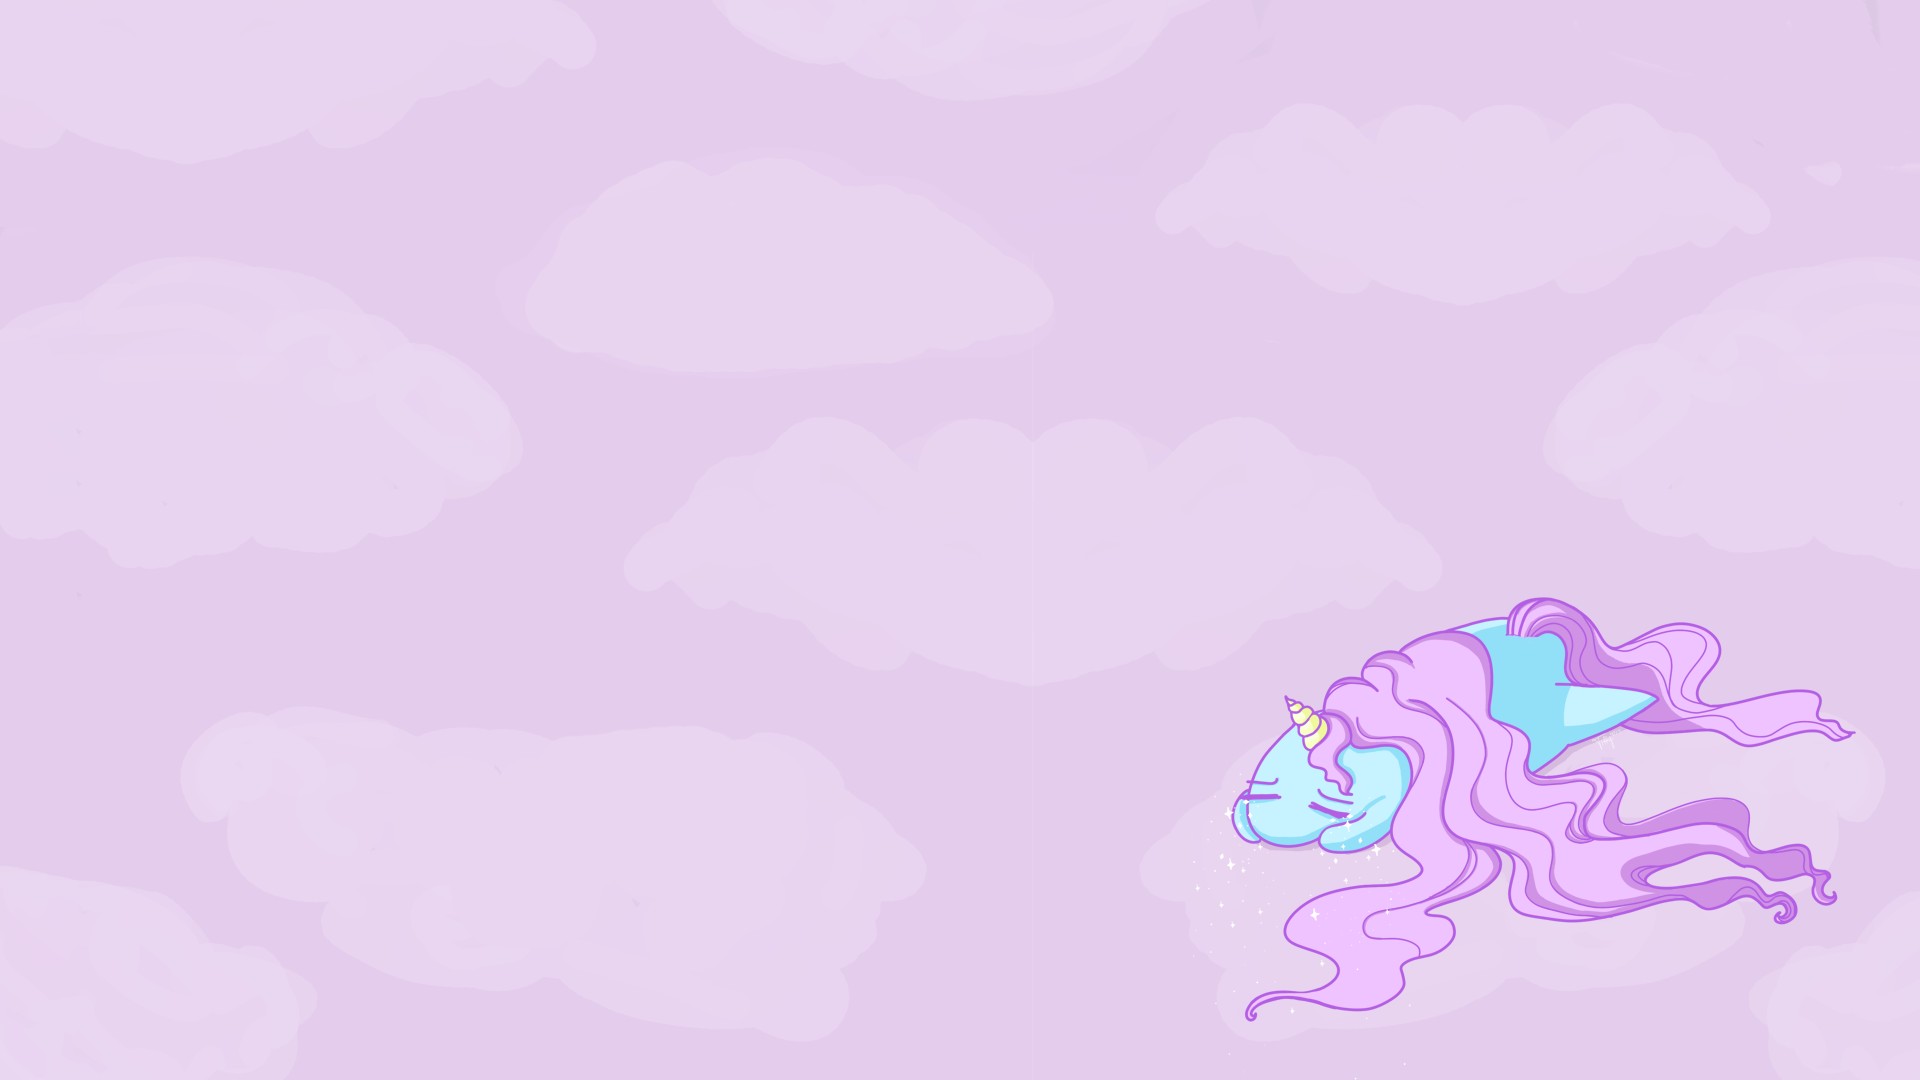 Cute Girly Unicorn Background Wallpaper HD with high-resolution 1920x1080 pixel. You can use this wallpaper for your Desktop Computer Backgrounds, Mac Wallpapers, Android Lock screen or iPhone Screensavers and another smartphone device